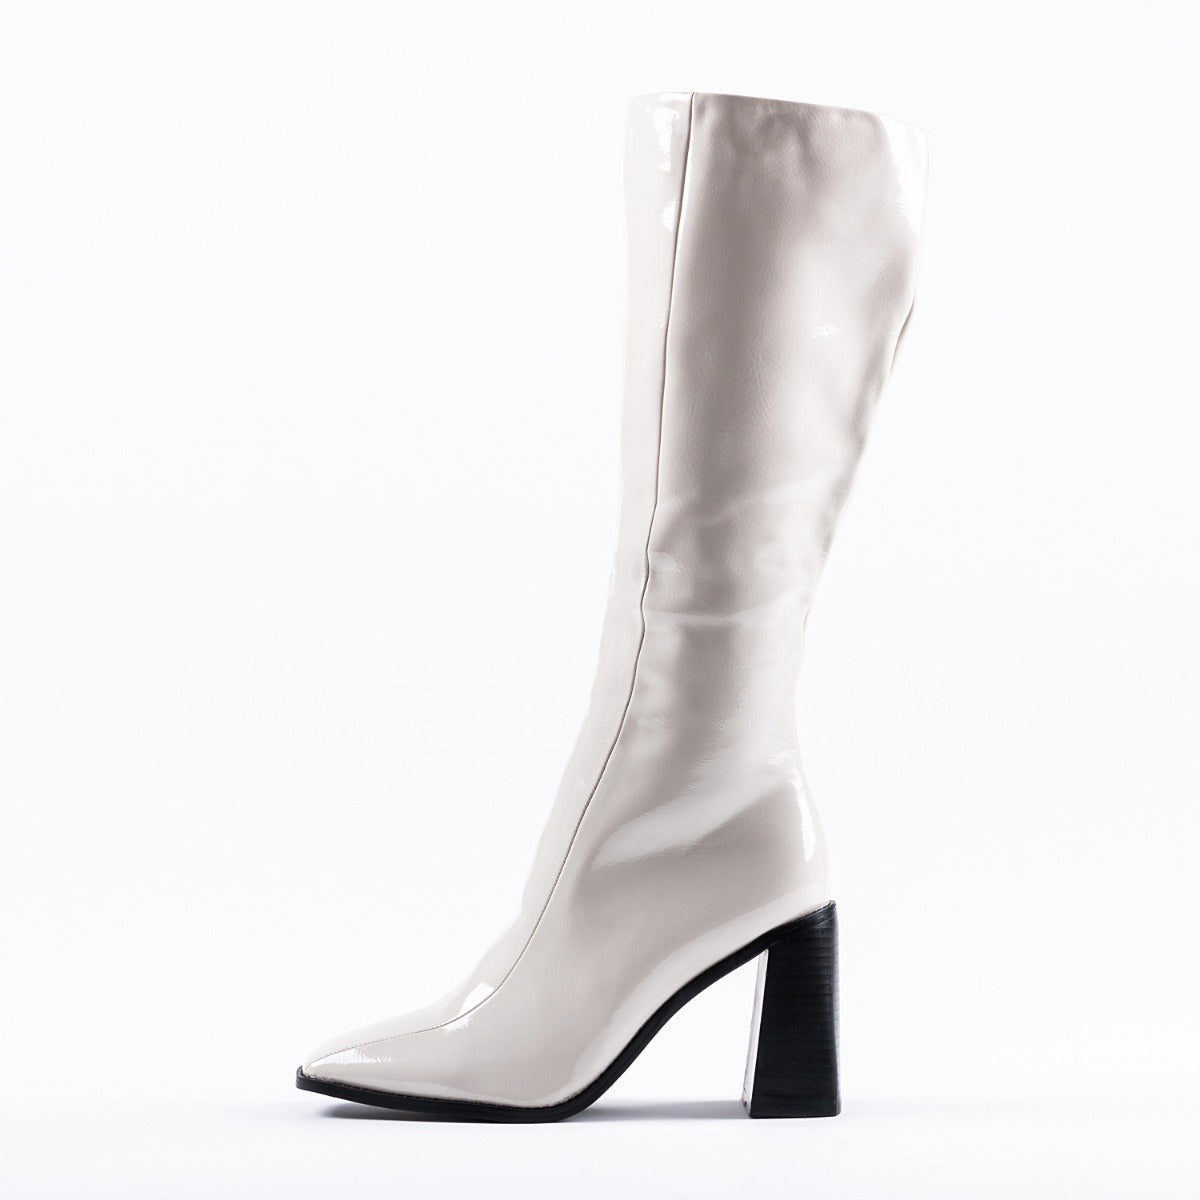 RAID Lenore Knee High Boot in Off White Crinkle Patent